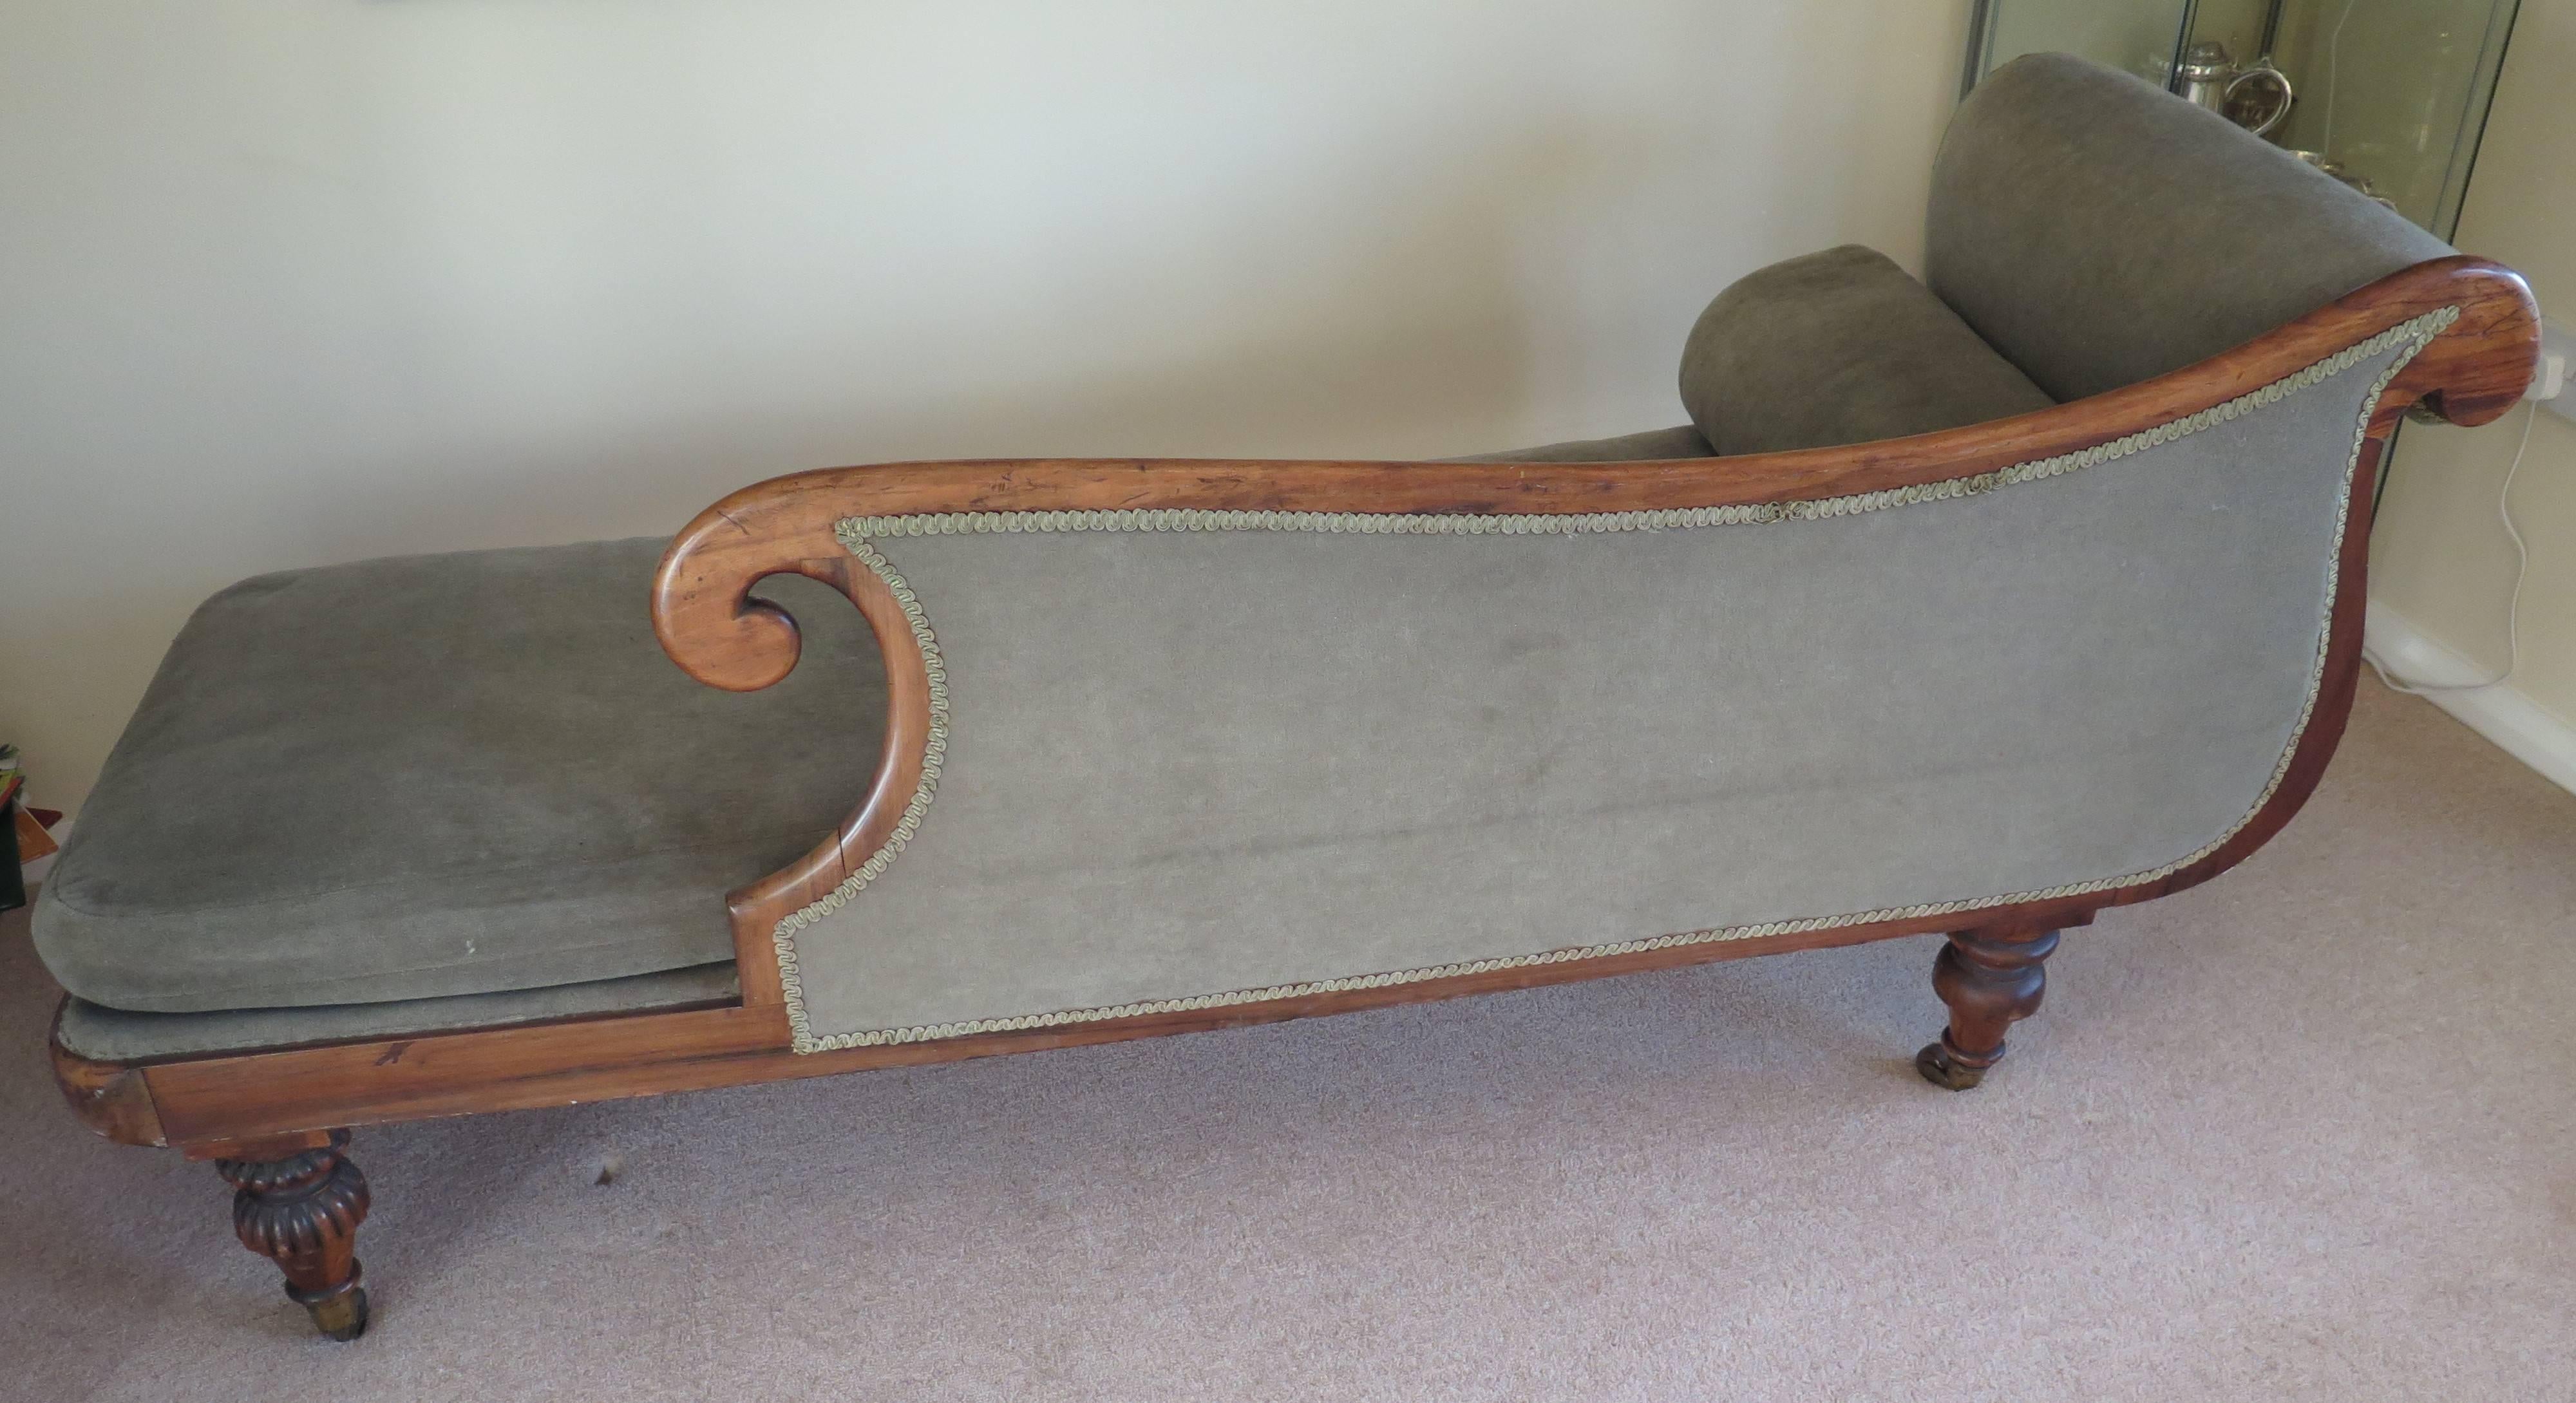 Regency Period Chaise Longue or Daybed, Mahogany, William IVth, circa 1830 1